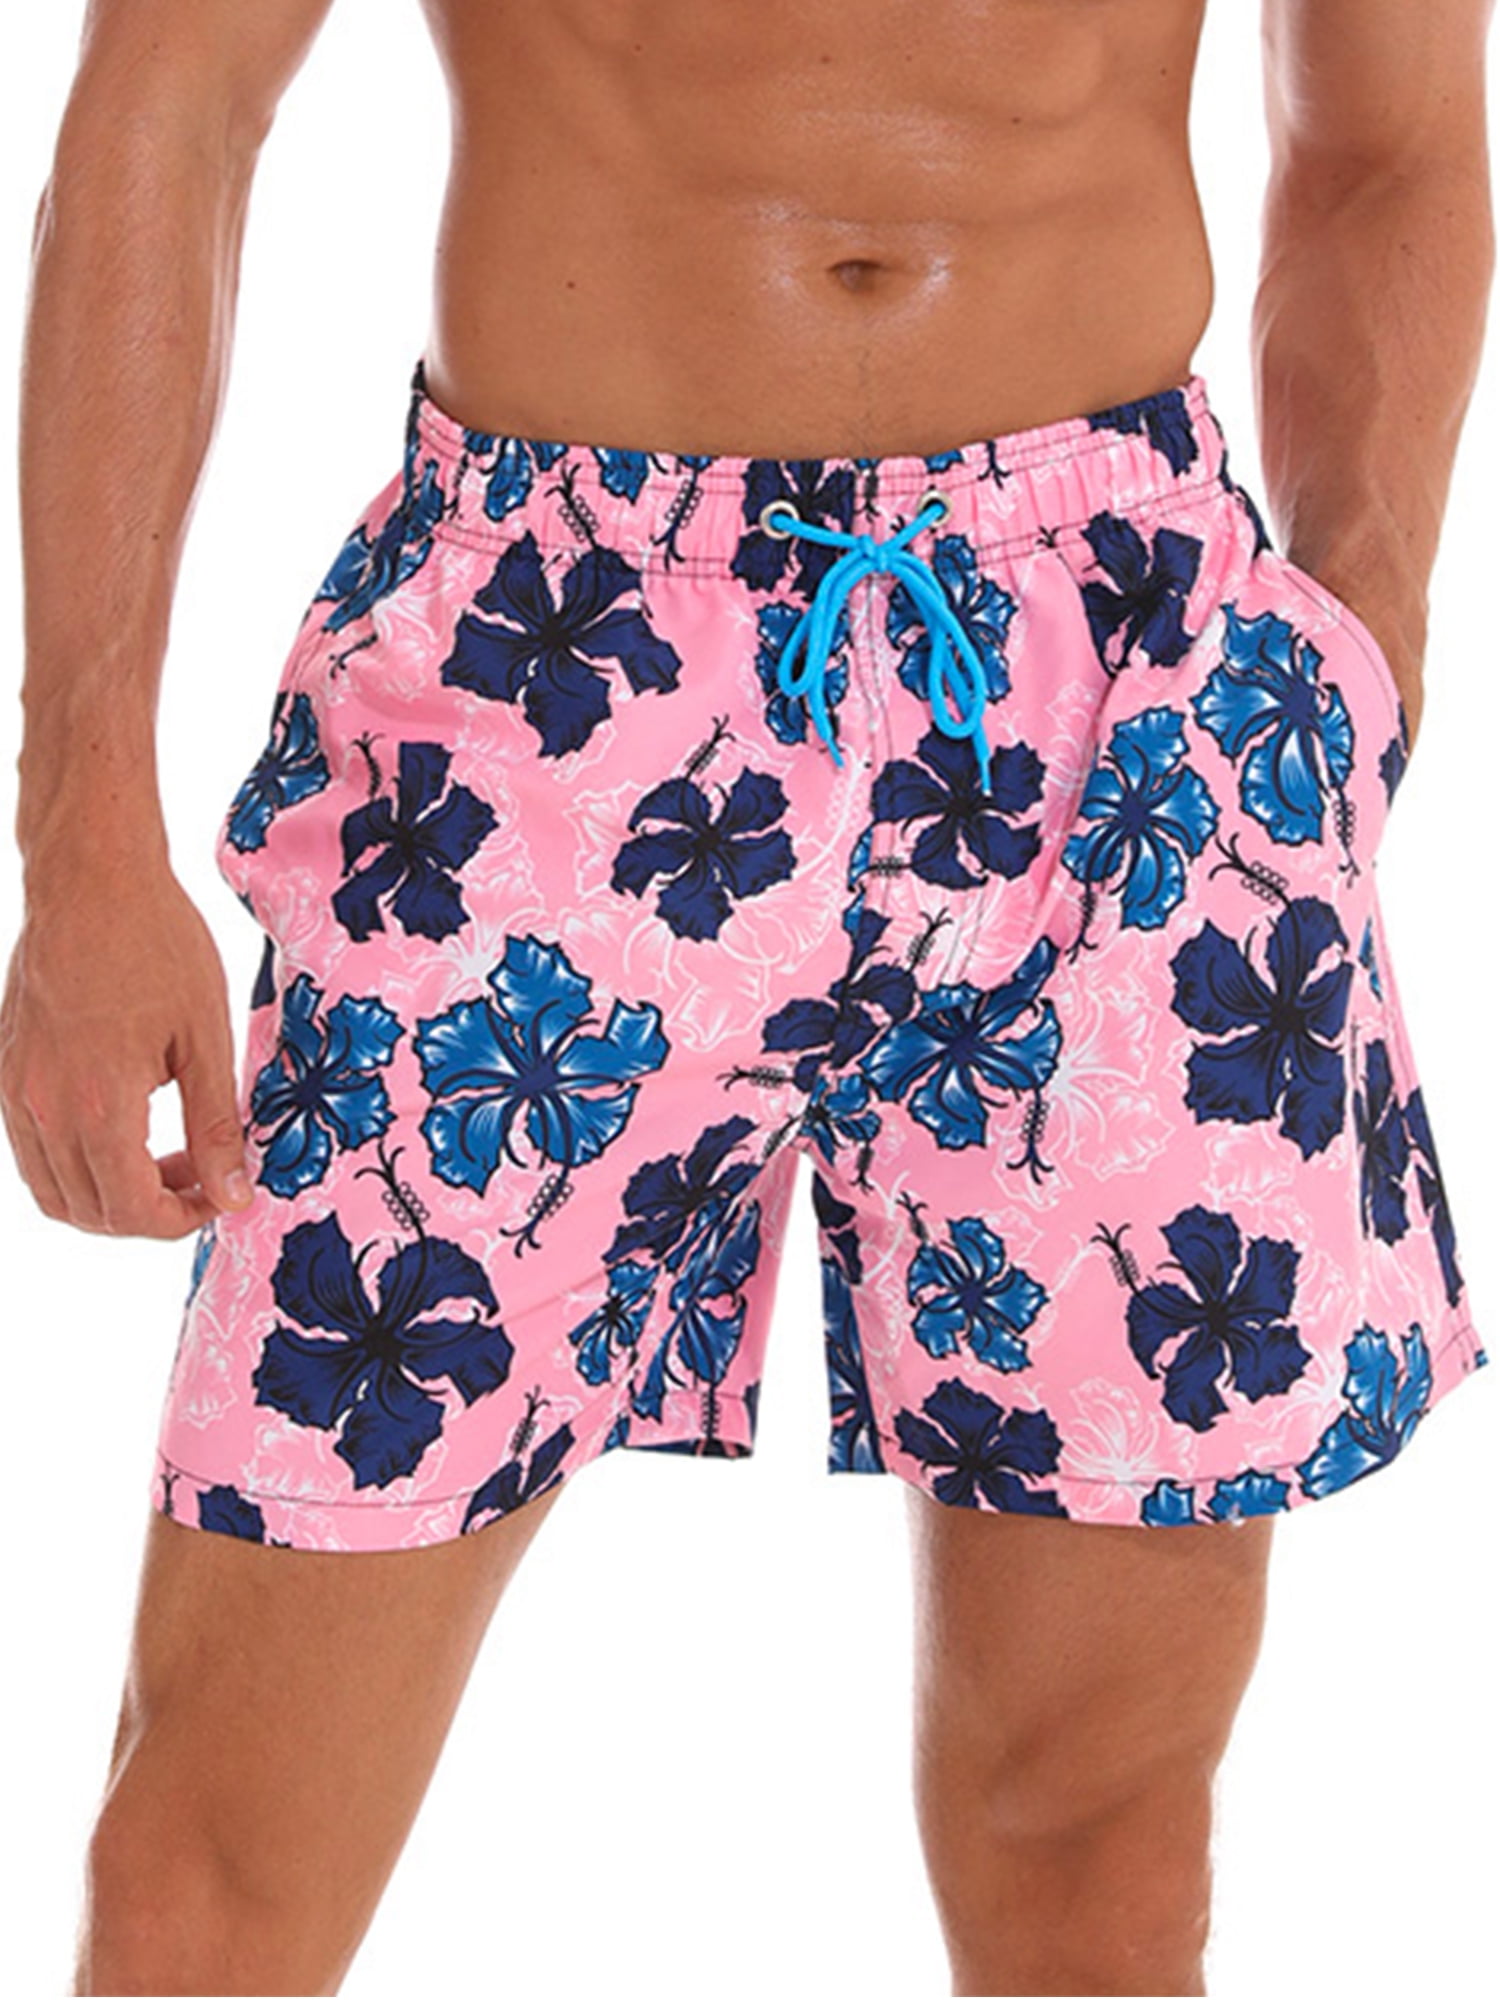 Mens Swim Trunks Pretty Daisy Floral Print Printed Beach Board Shorts with Pockets Cool Novelty Bathing Suits for Teen Boys